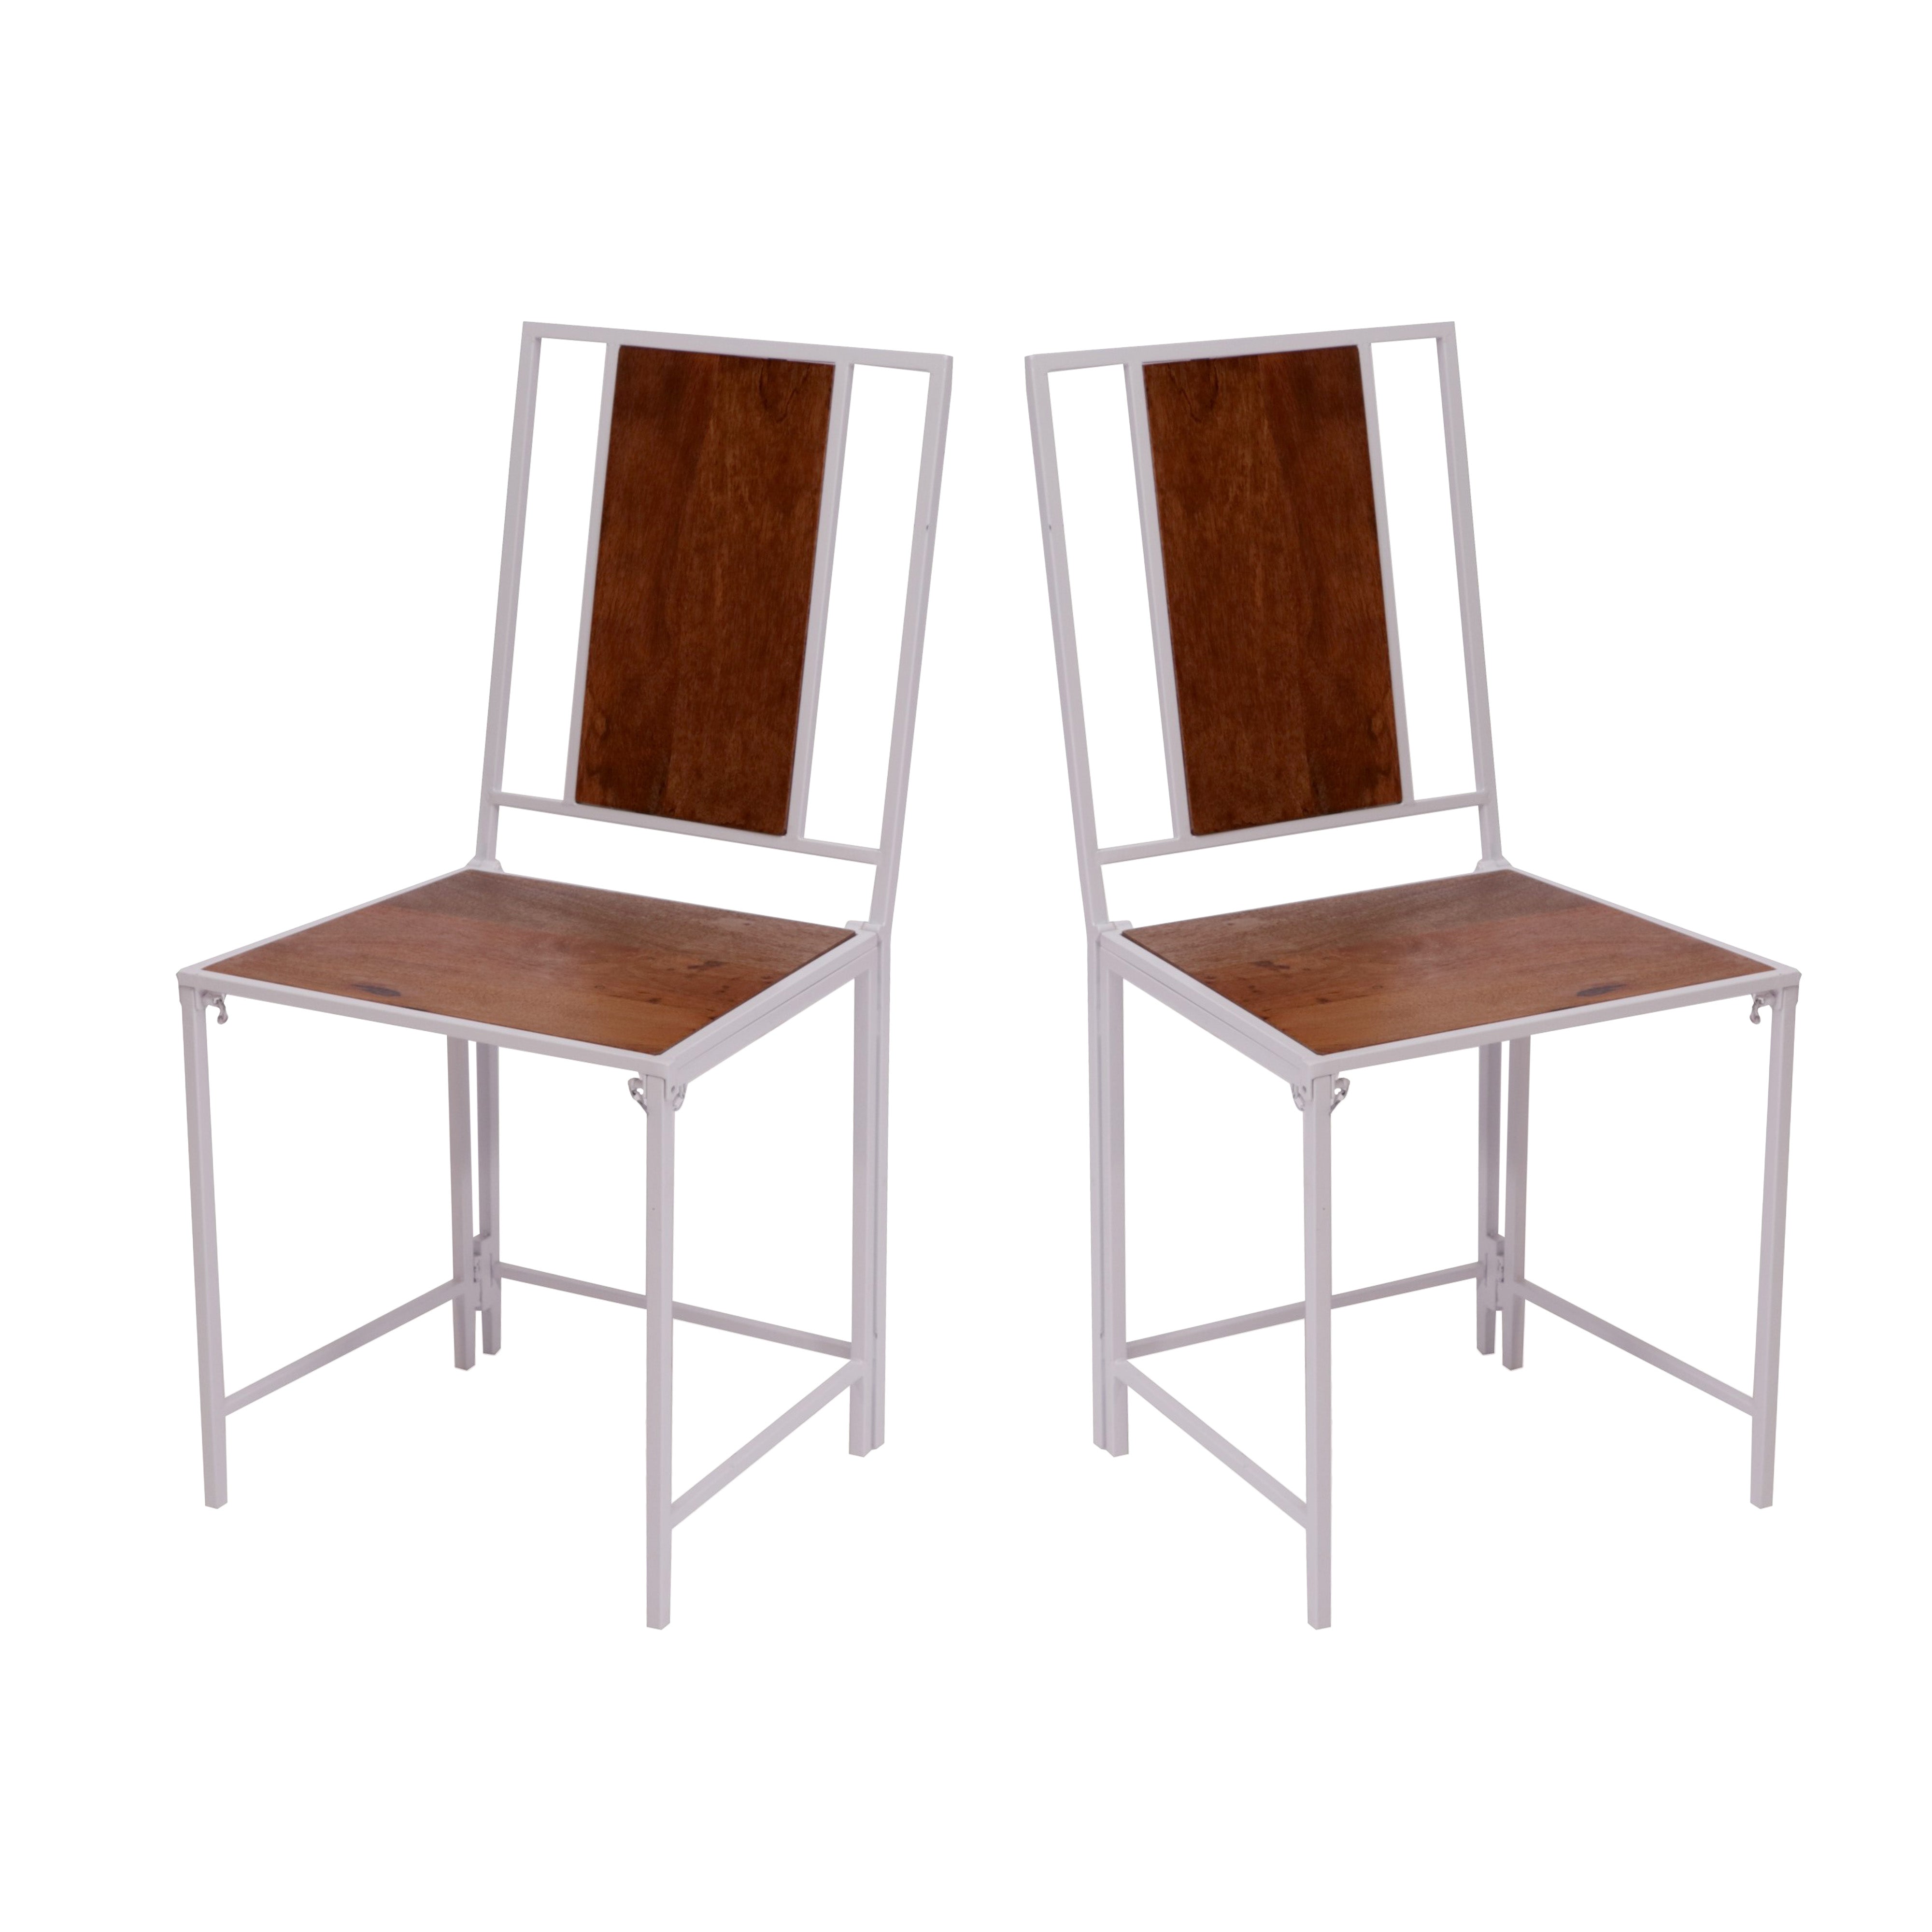 (Set of 2) White Wooden Metallic Dinning Folding Chair Dining Chair